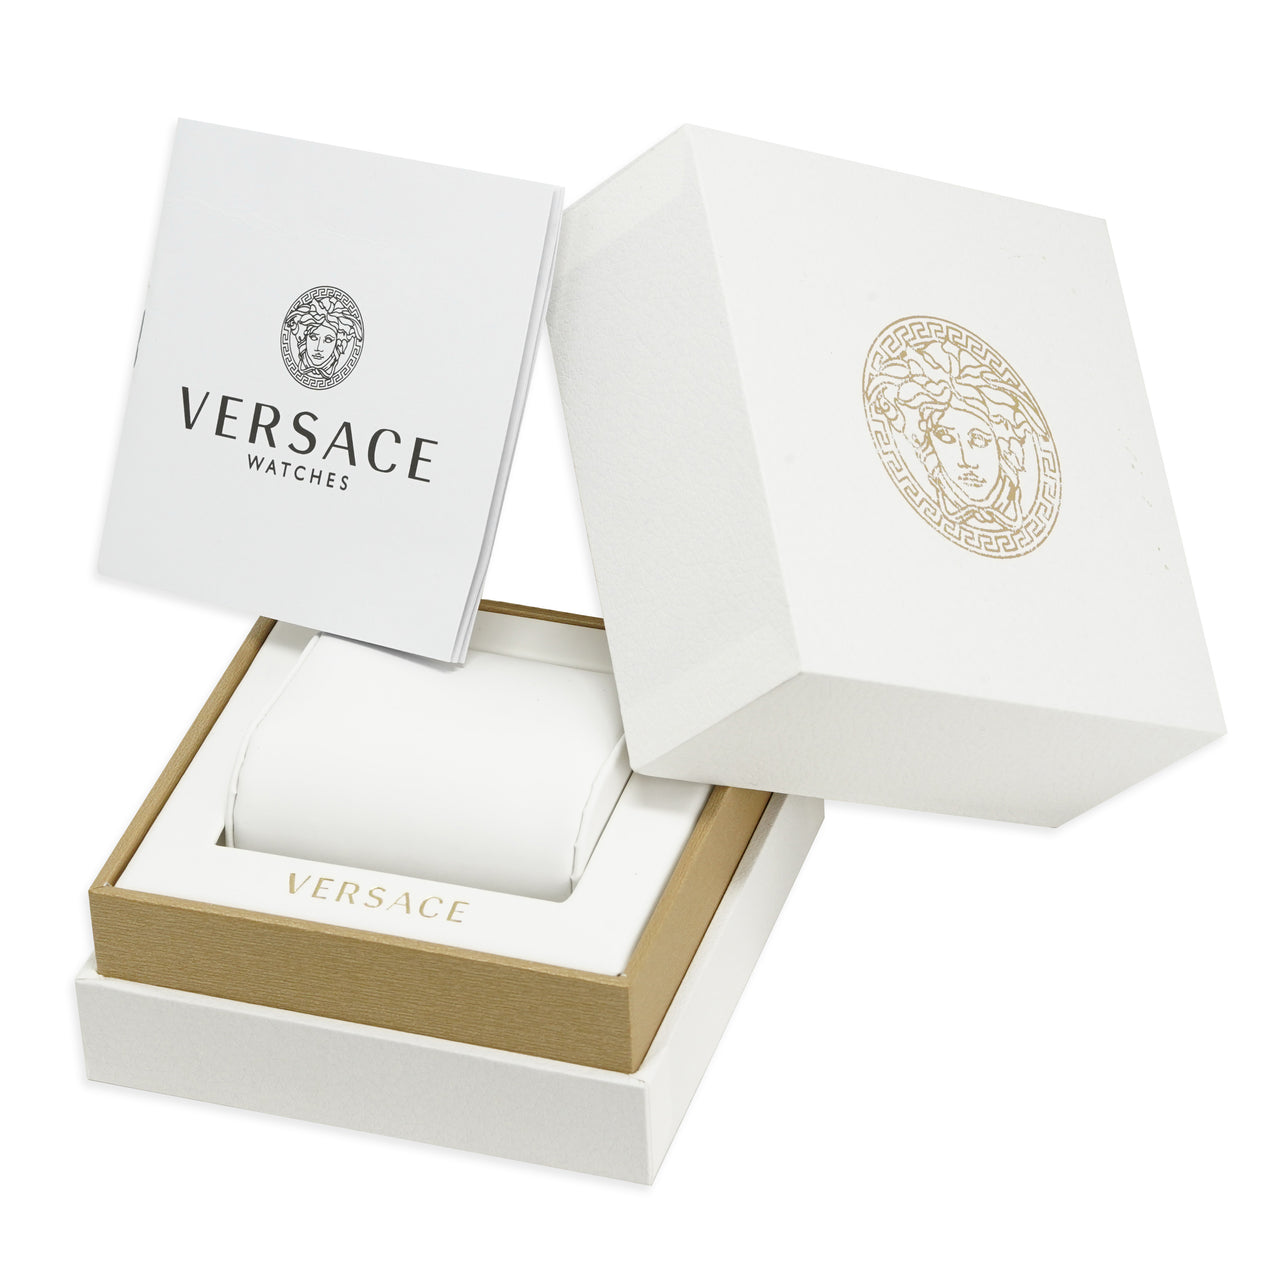 Versace Men's Watch Theros Automatic Brown VEDX00219